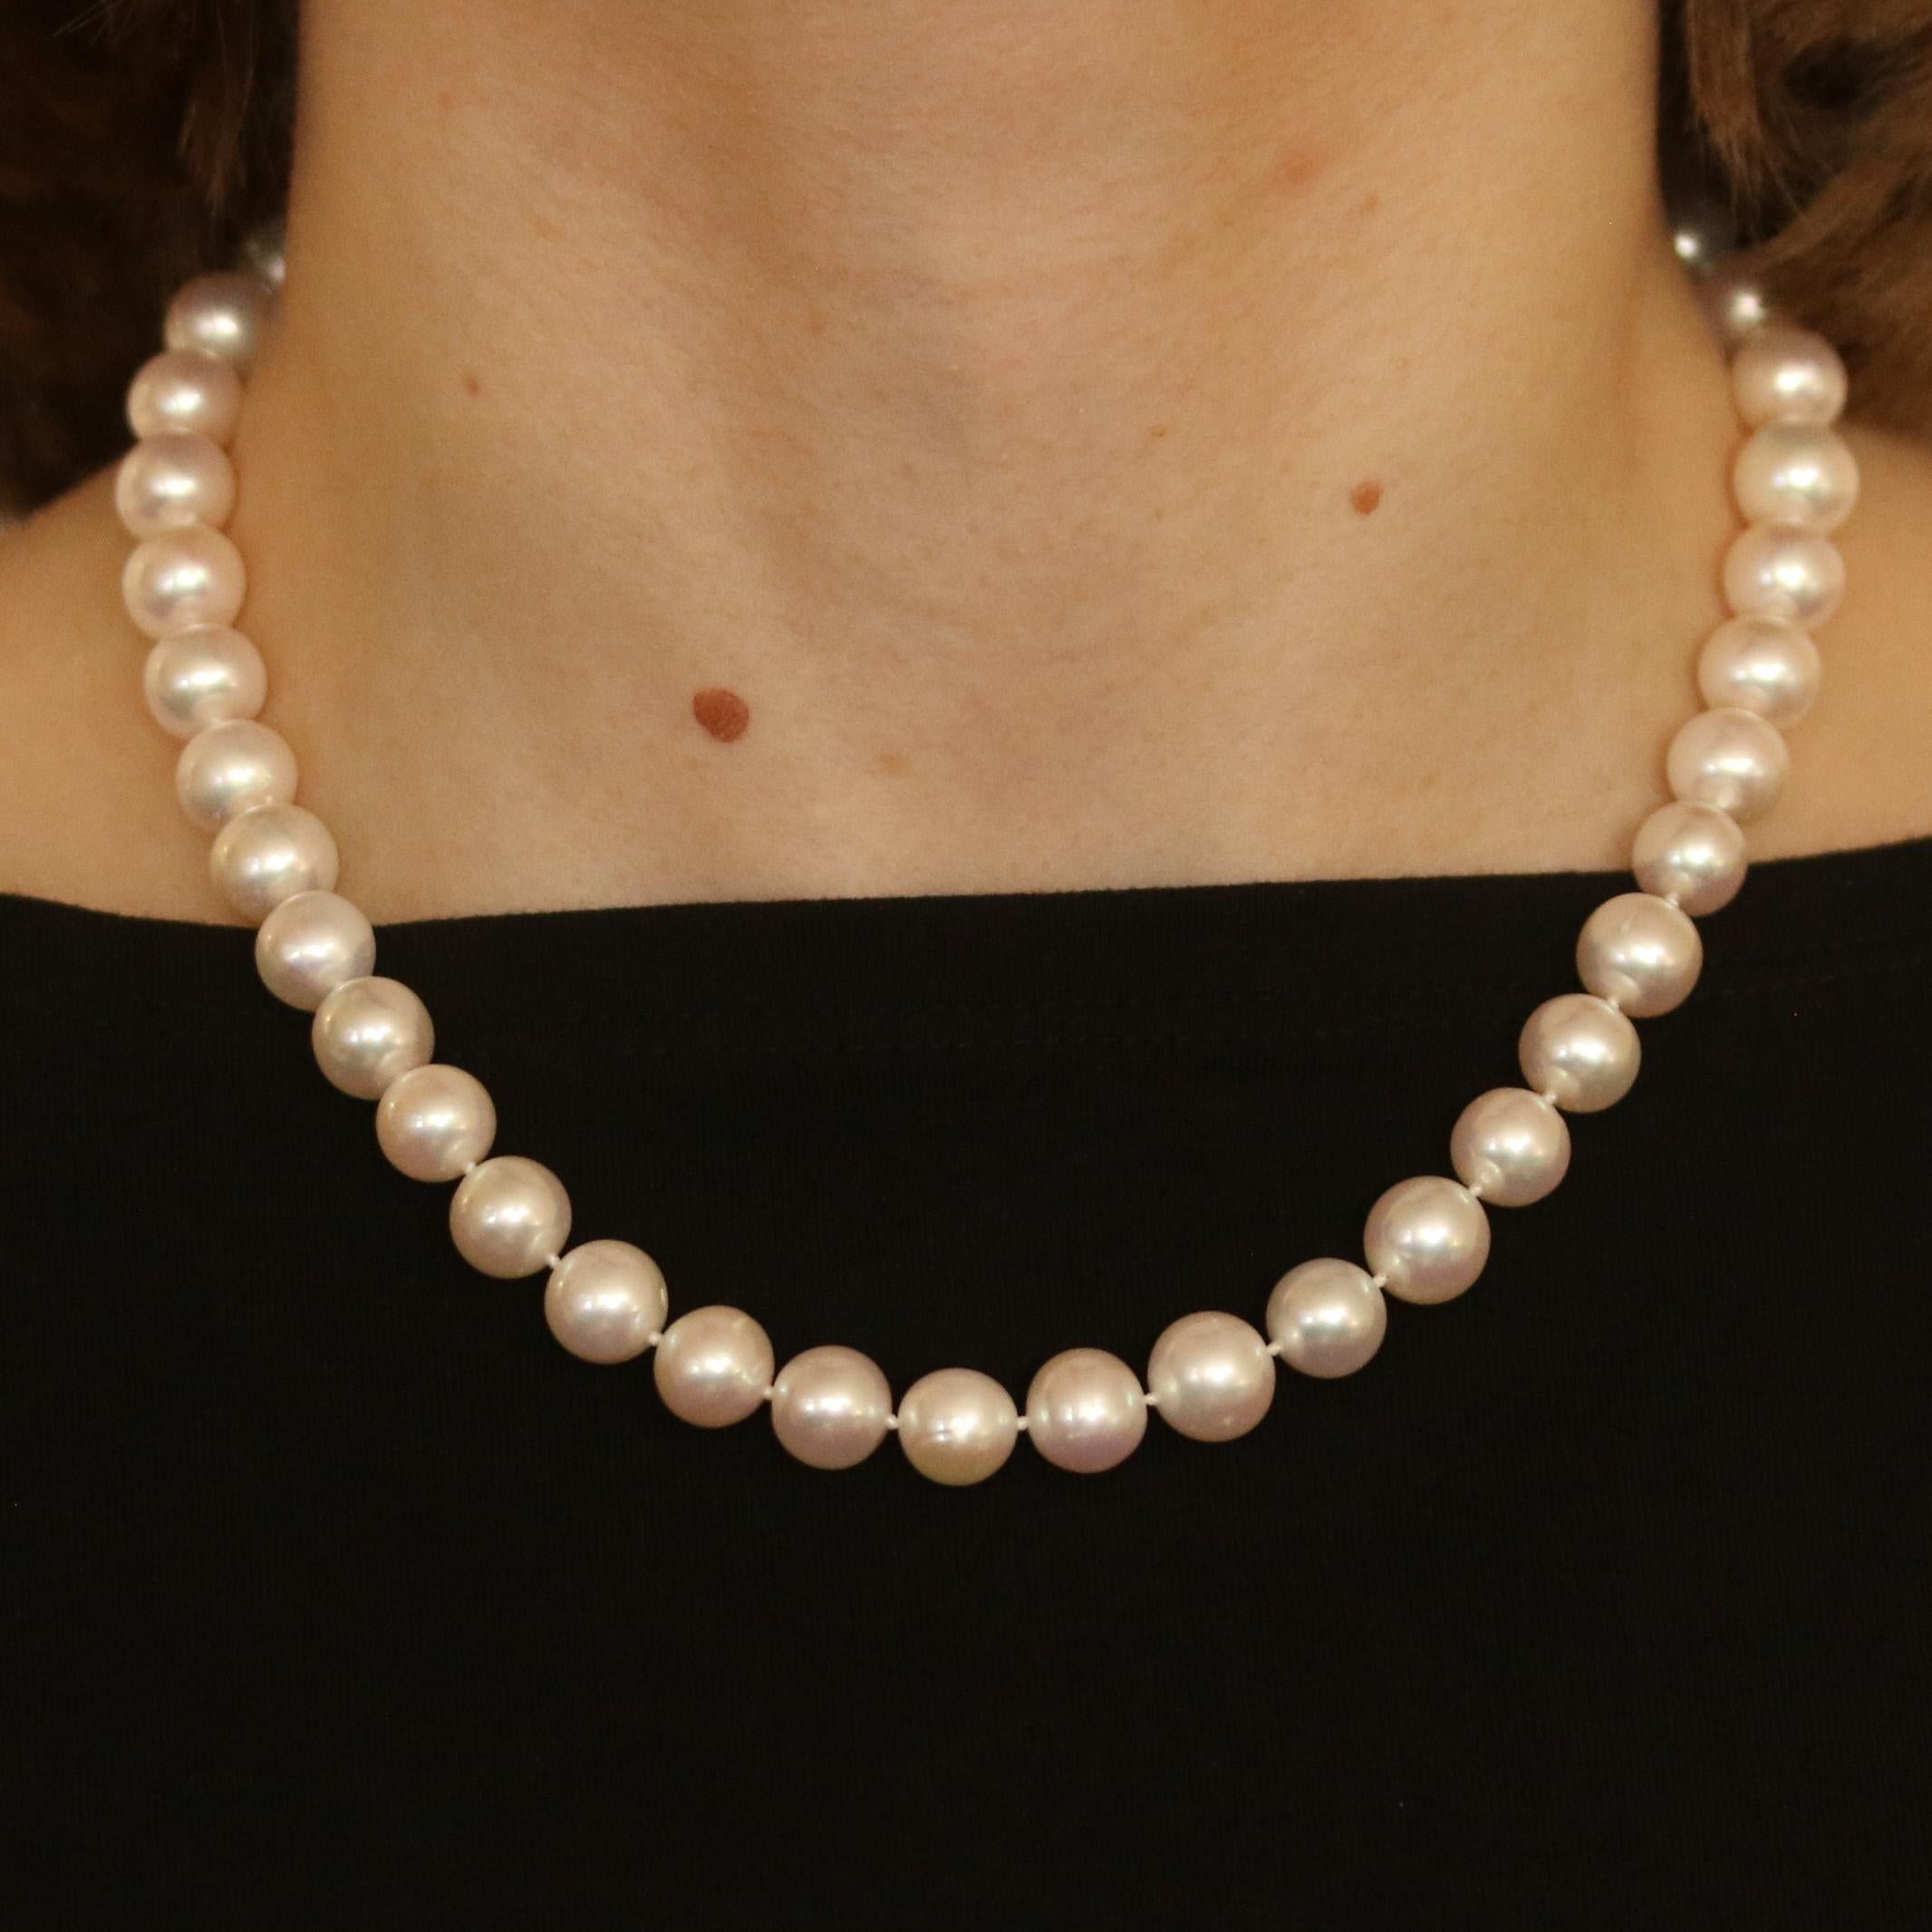 Add a touch of class to any outfit with this beautiful pearl strand necklace. The classic pearl necklace is set with genuine large round white pearls with an average size of 10mm. The pearls are set along a white string strand with knots between